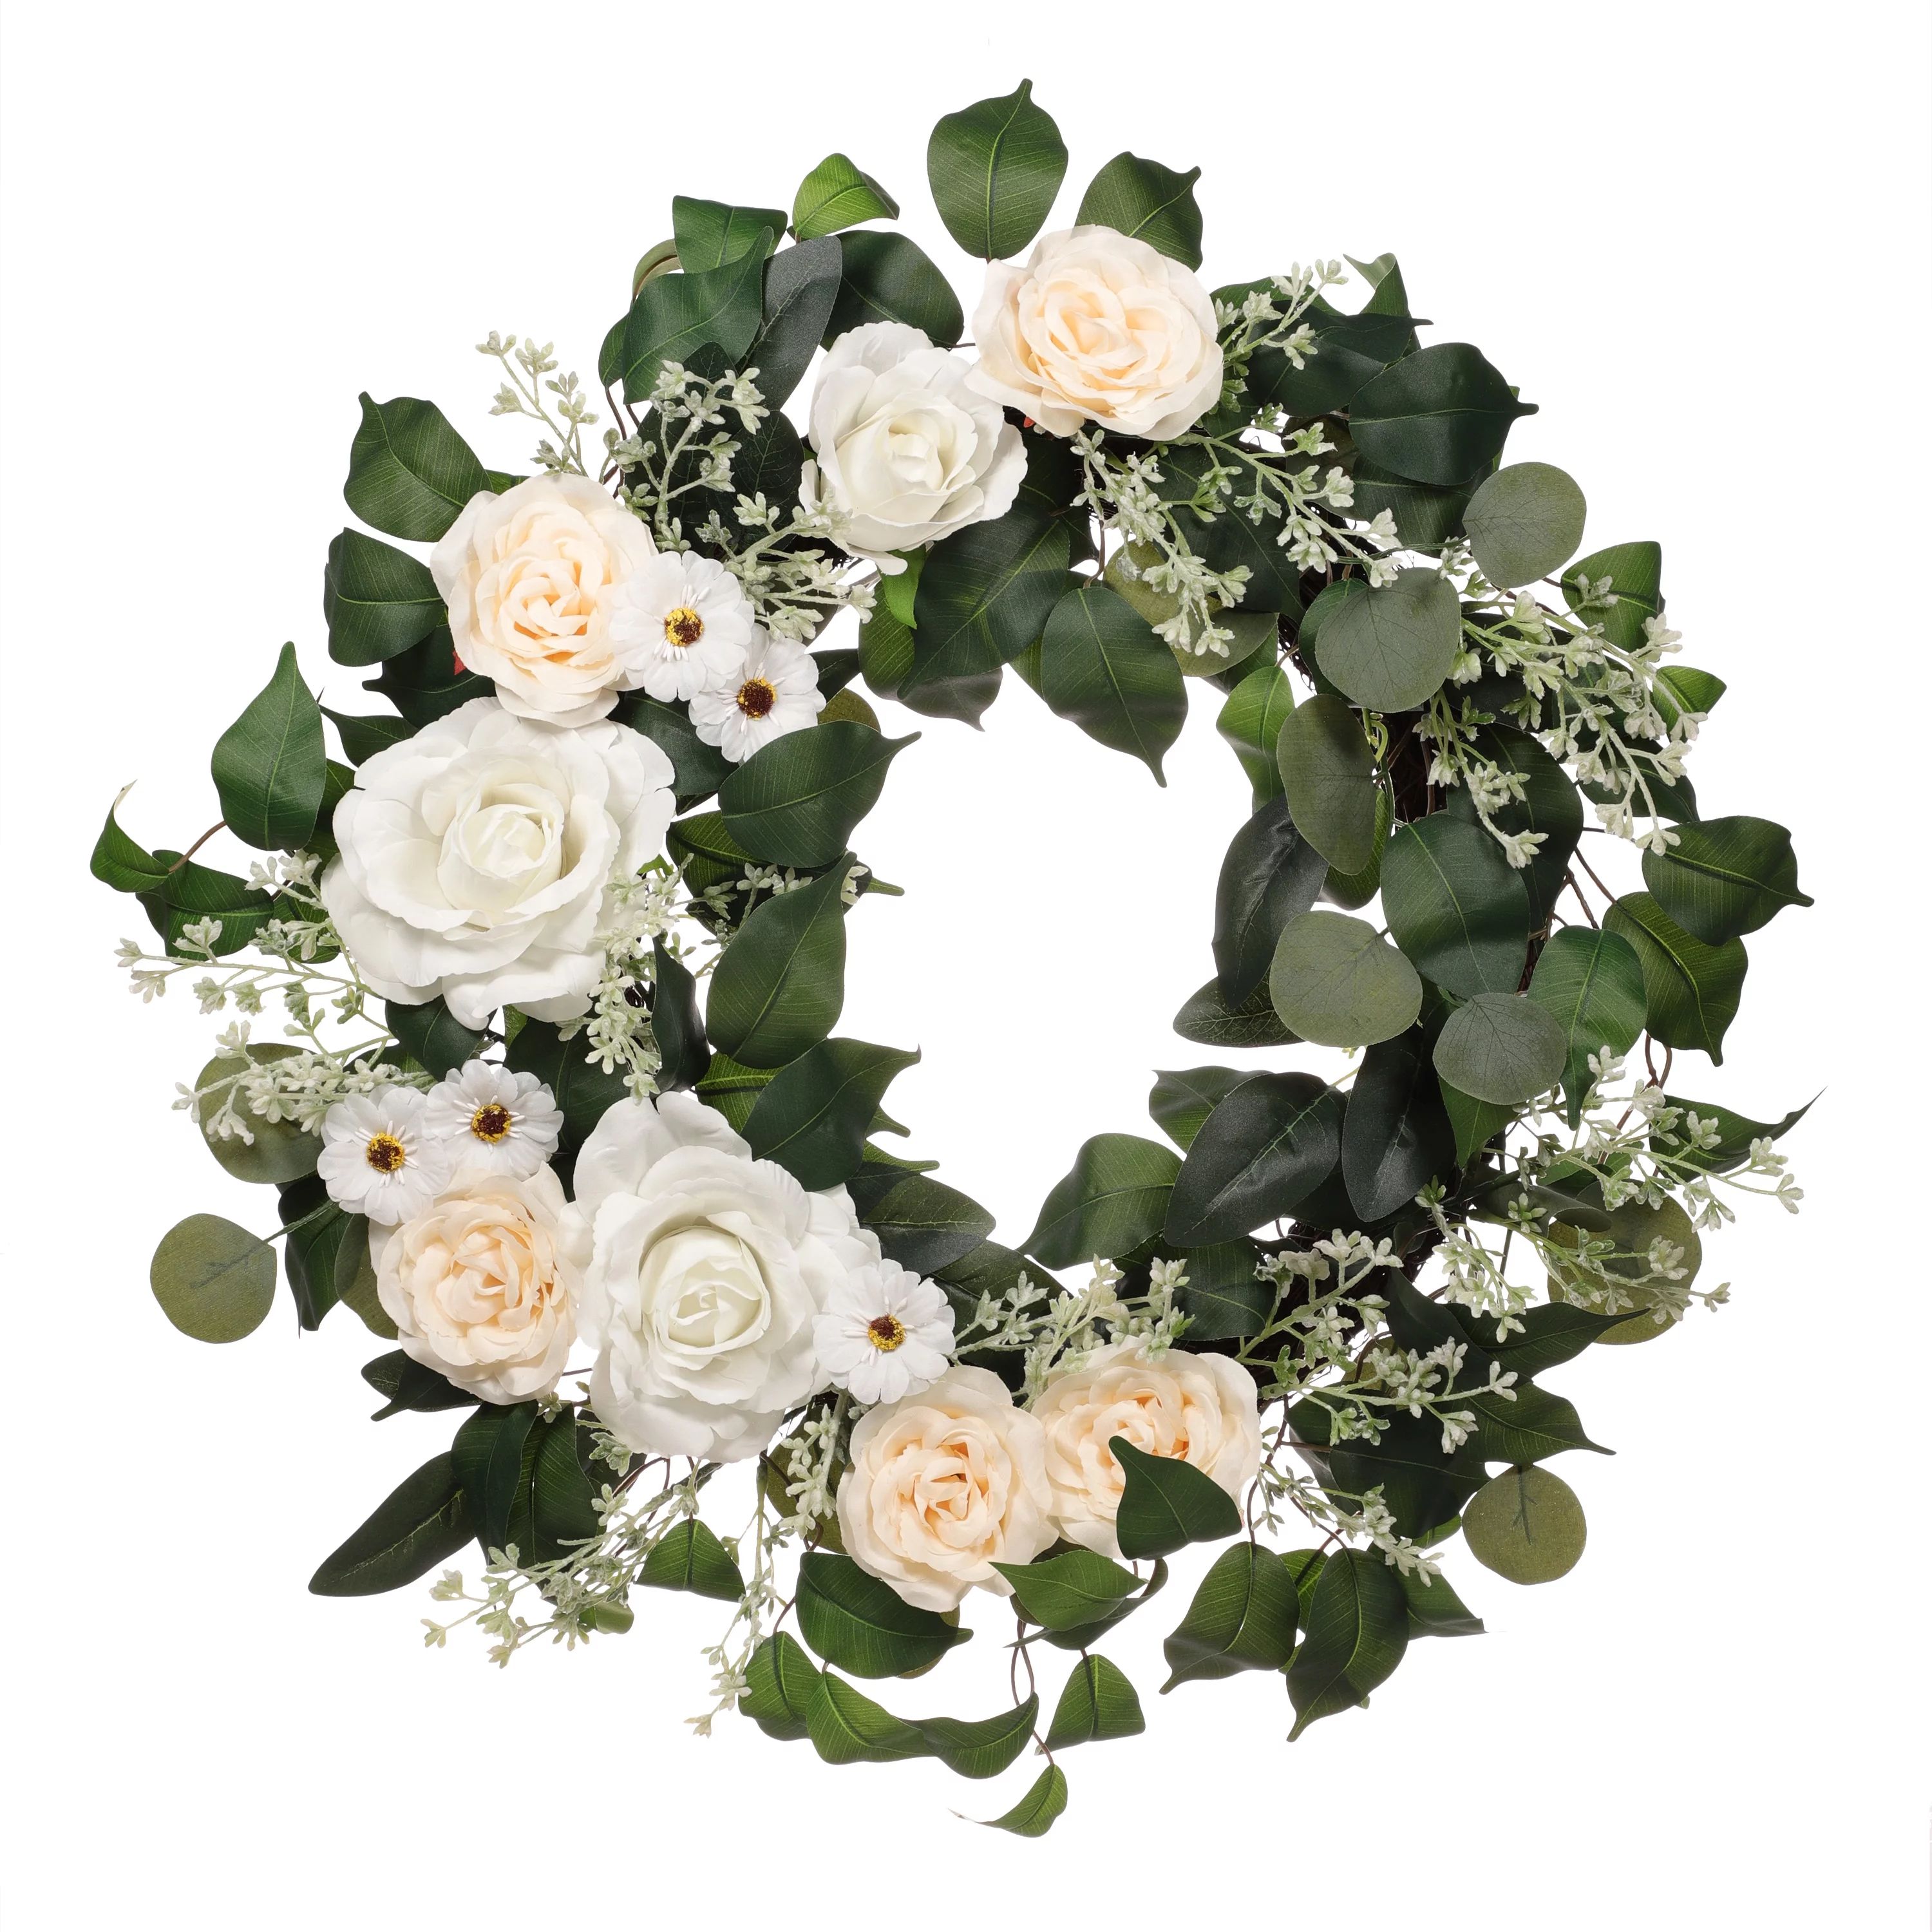 24" Artificial Rose, Camellia, Babys breath Floral Spring Wreath with Green Leaves | Walmart (US)